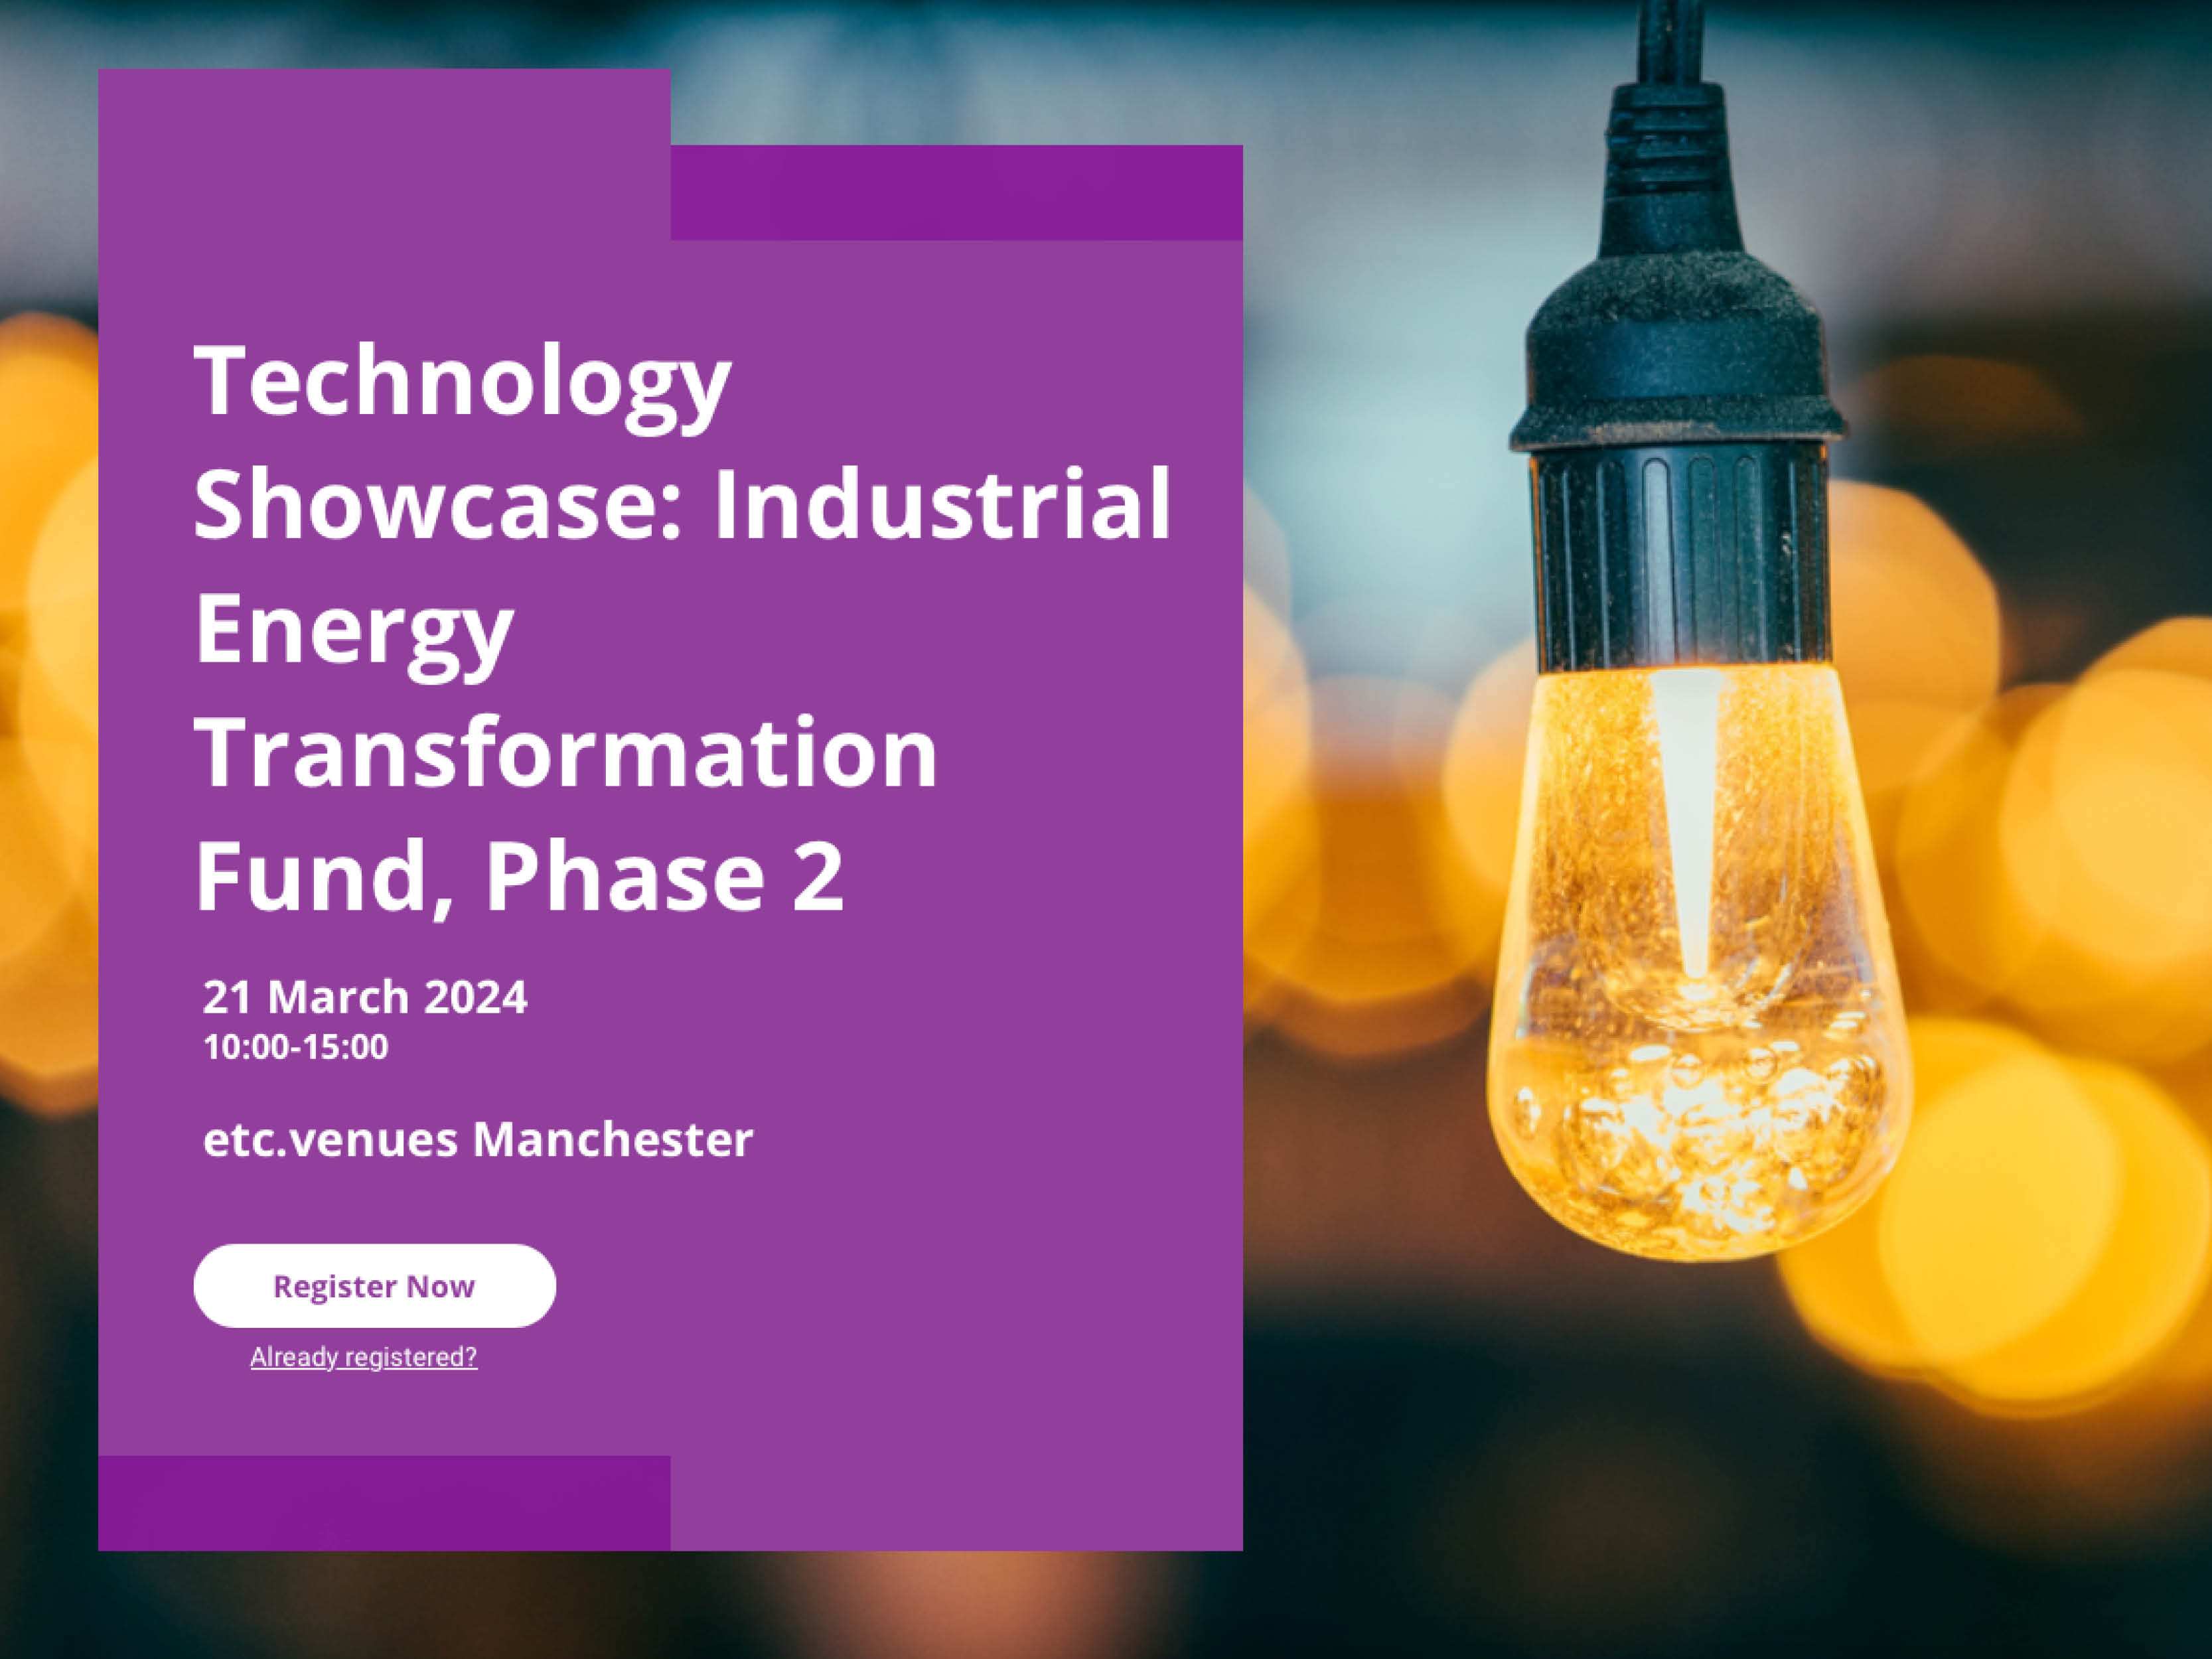 Technology Showcase: Industrial Energy Transformation Fund, Phase 2